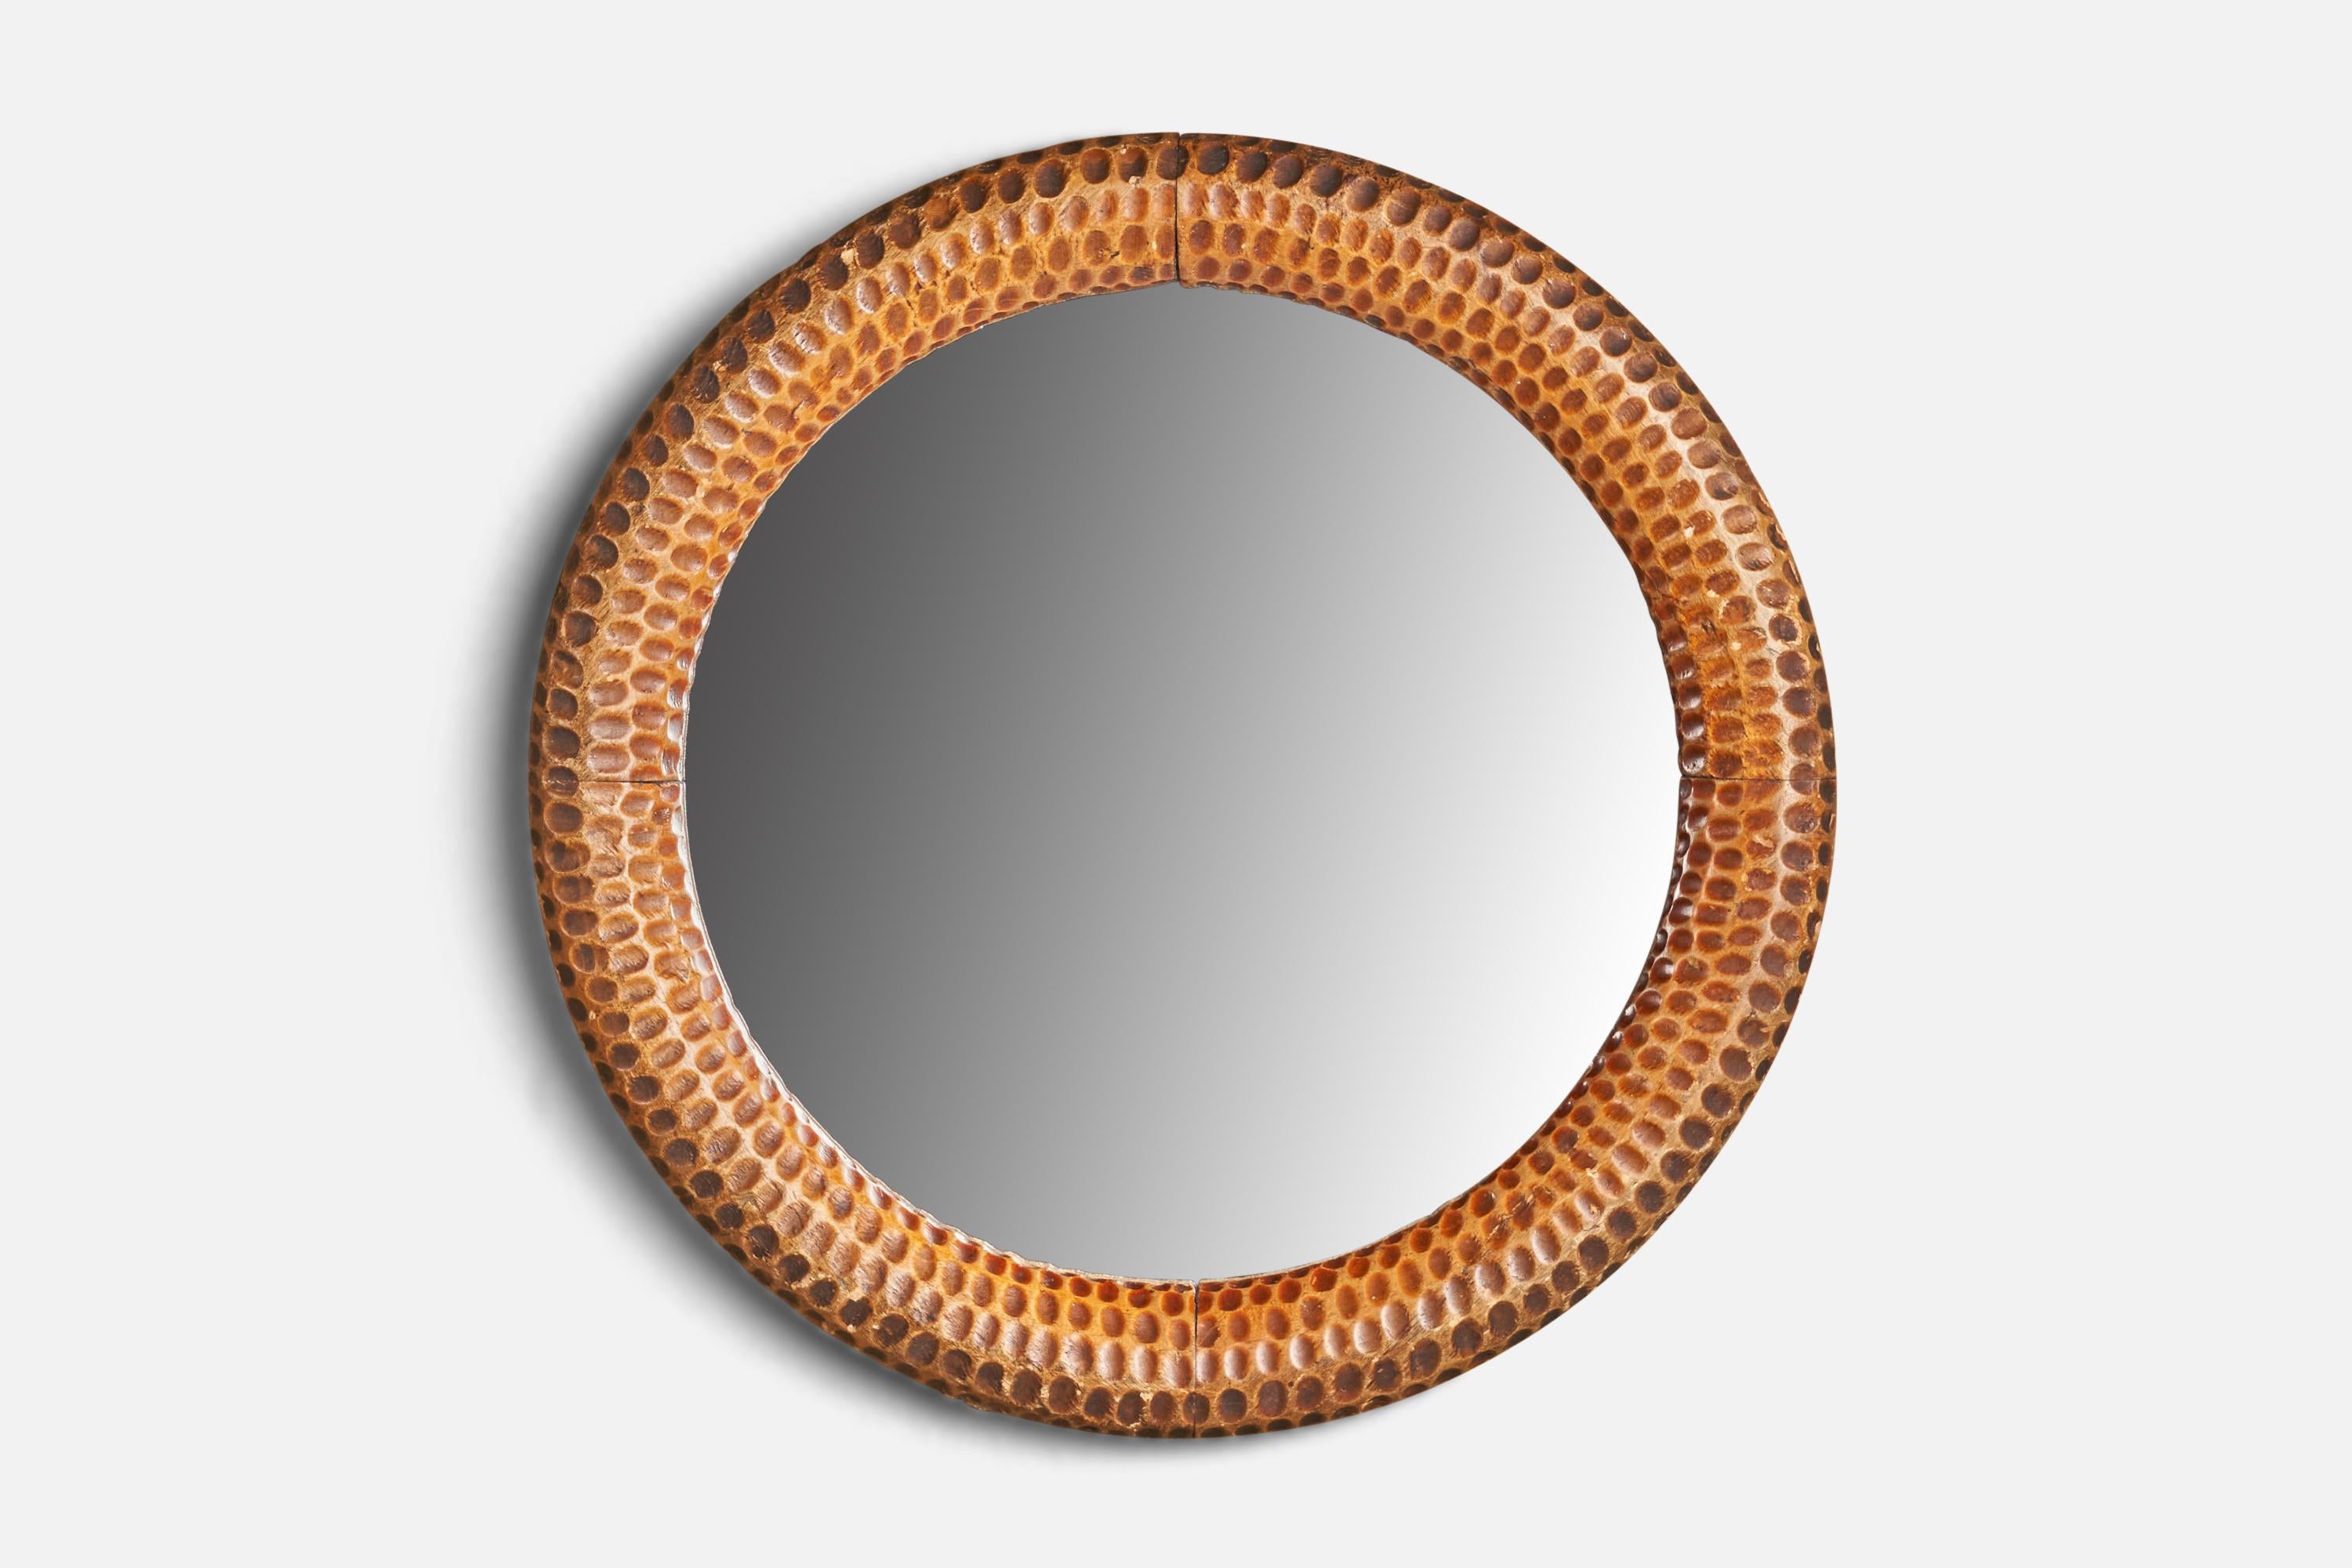 A carved and burnished wood wall mirror designed and produced in Italy, 1940s.